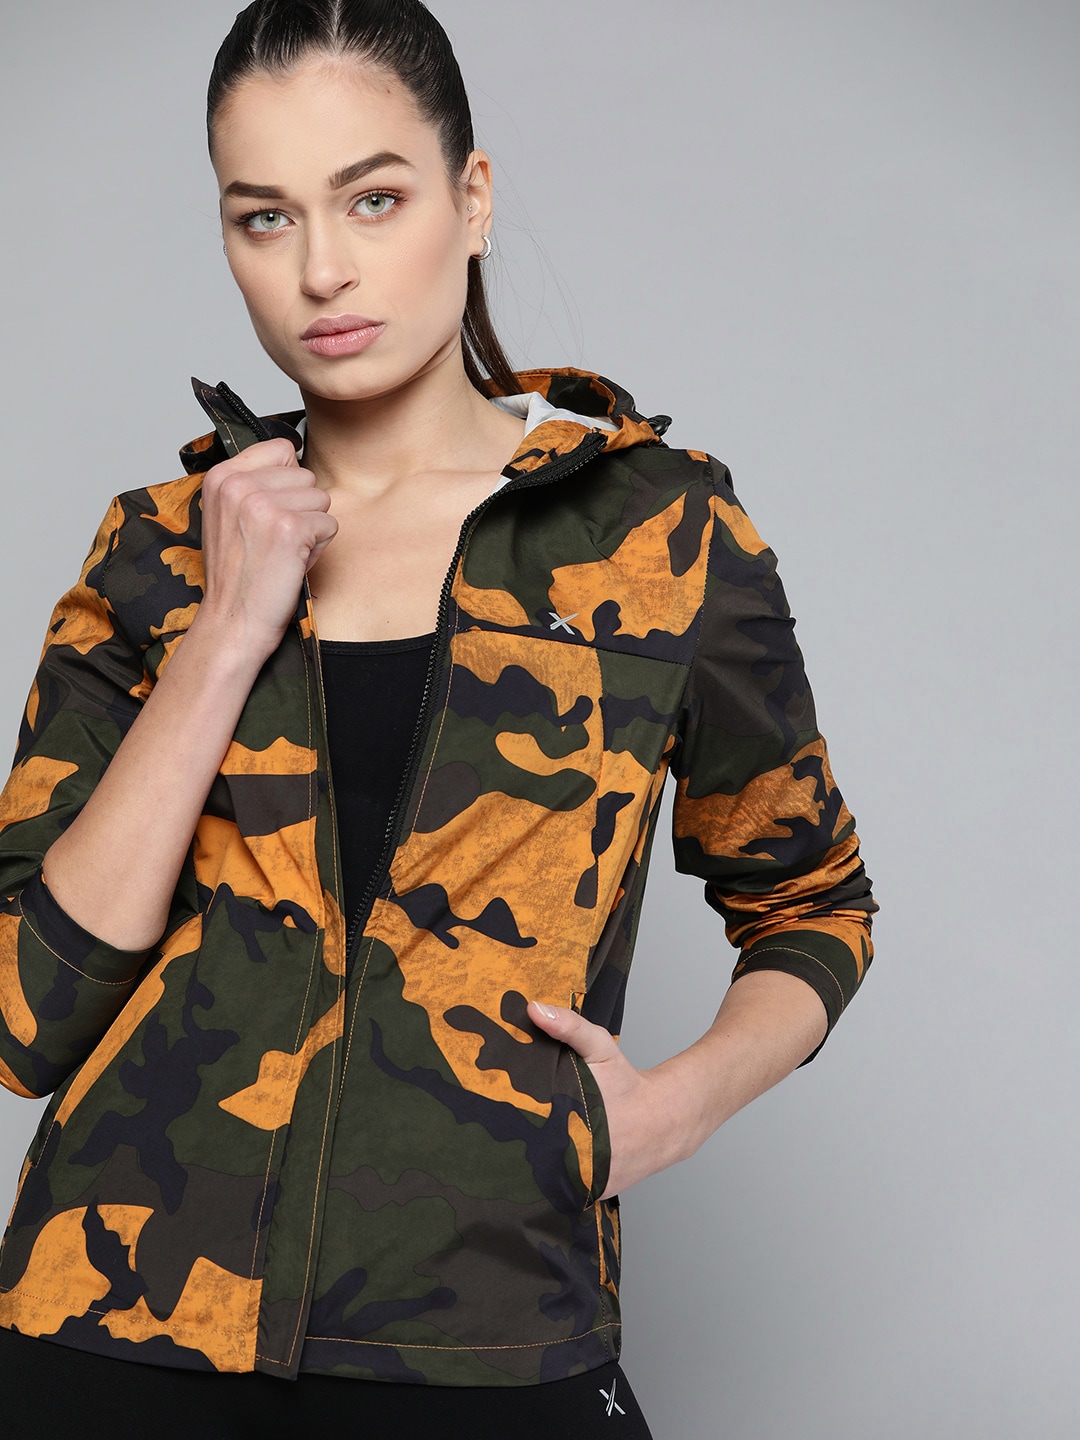 HRX By Hrithik Roshan Outdoor Women Rapid-Dry Camouflage Jacket Price in India